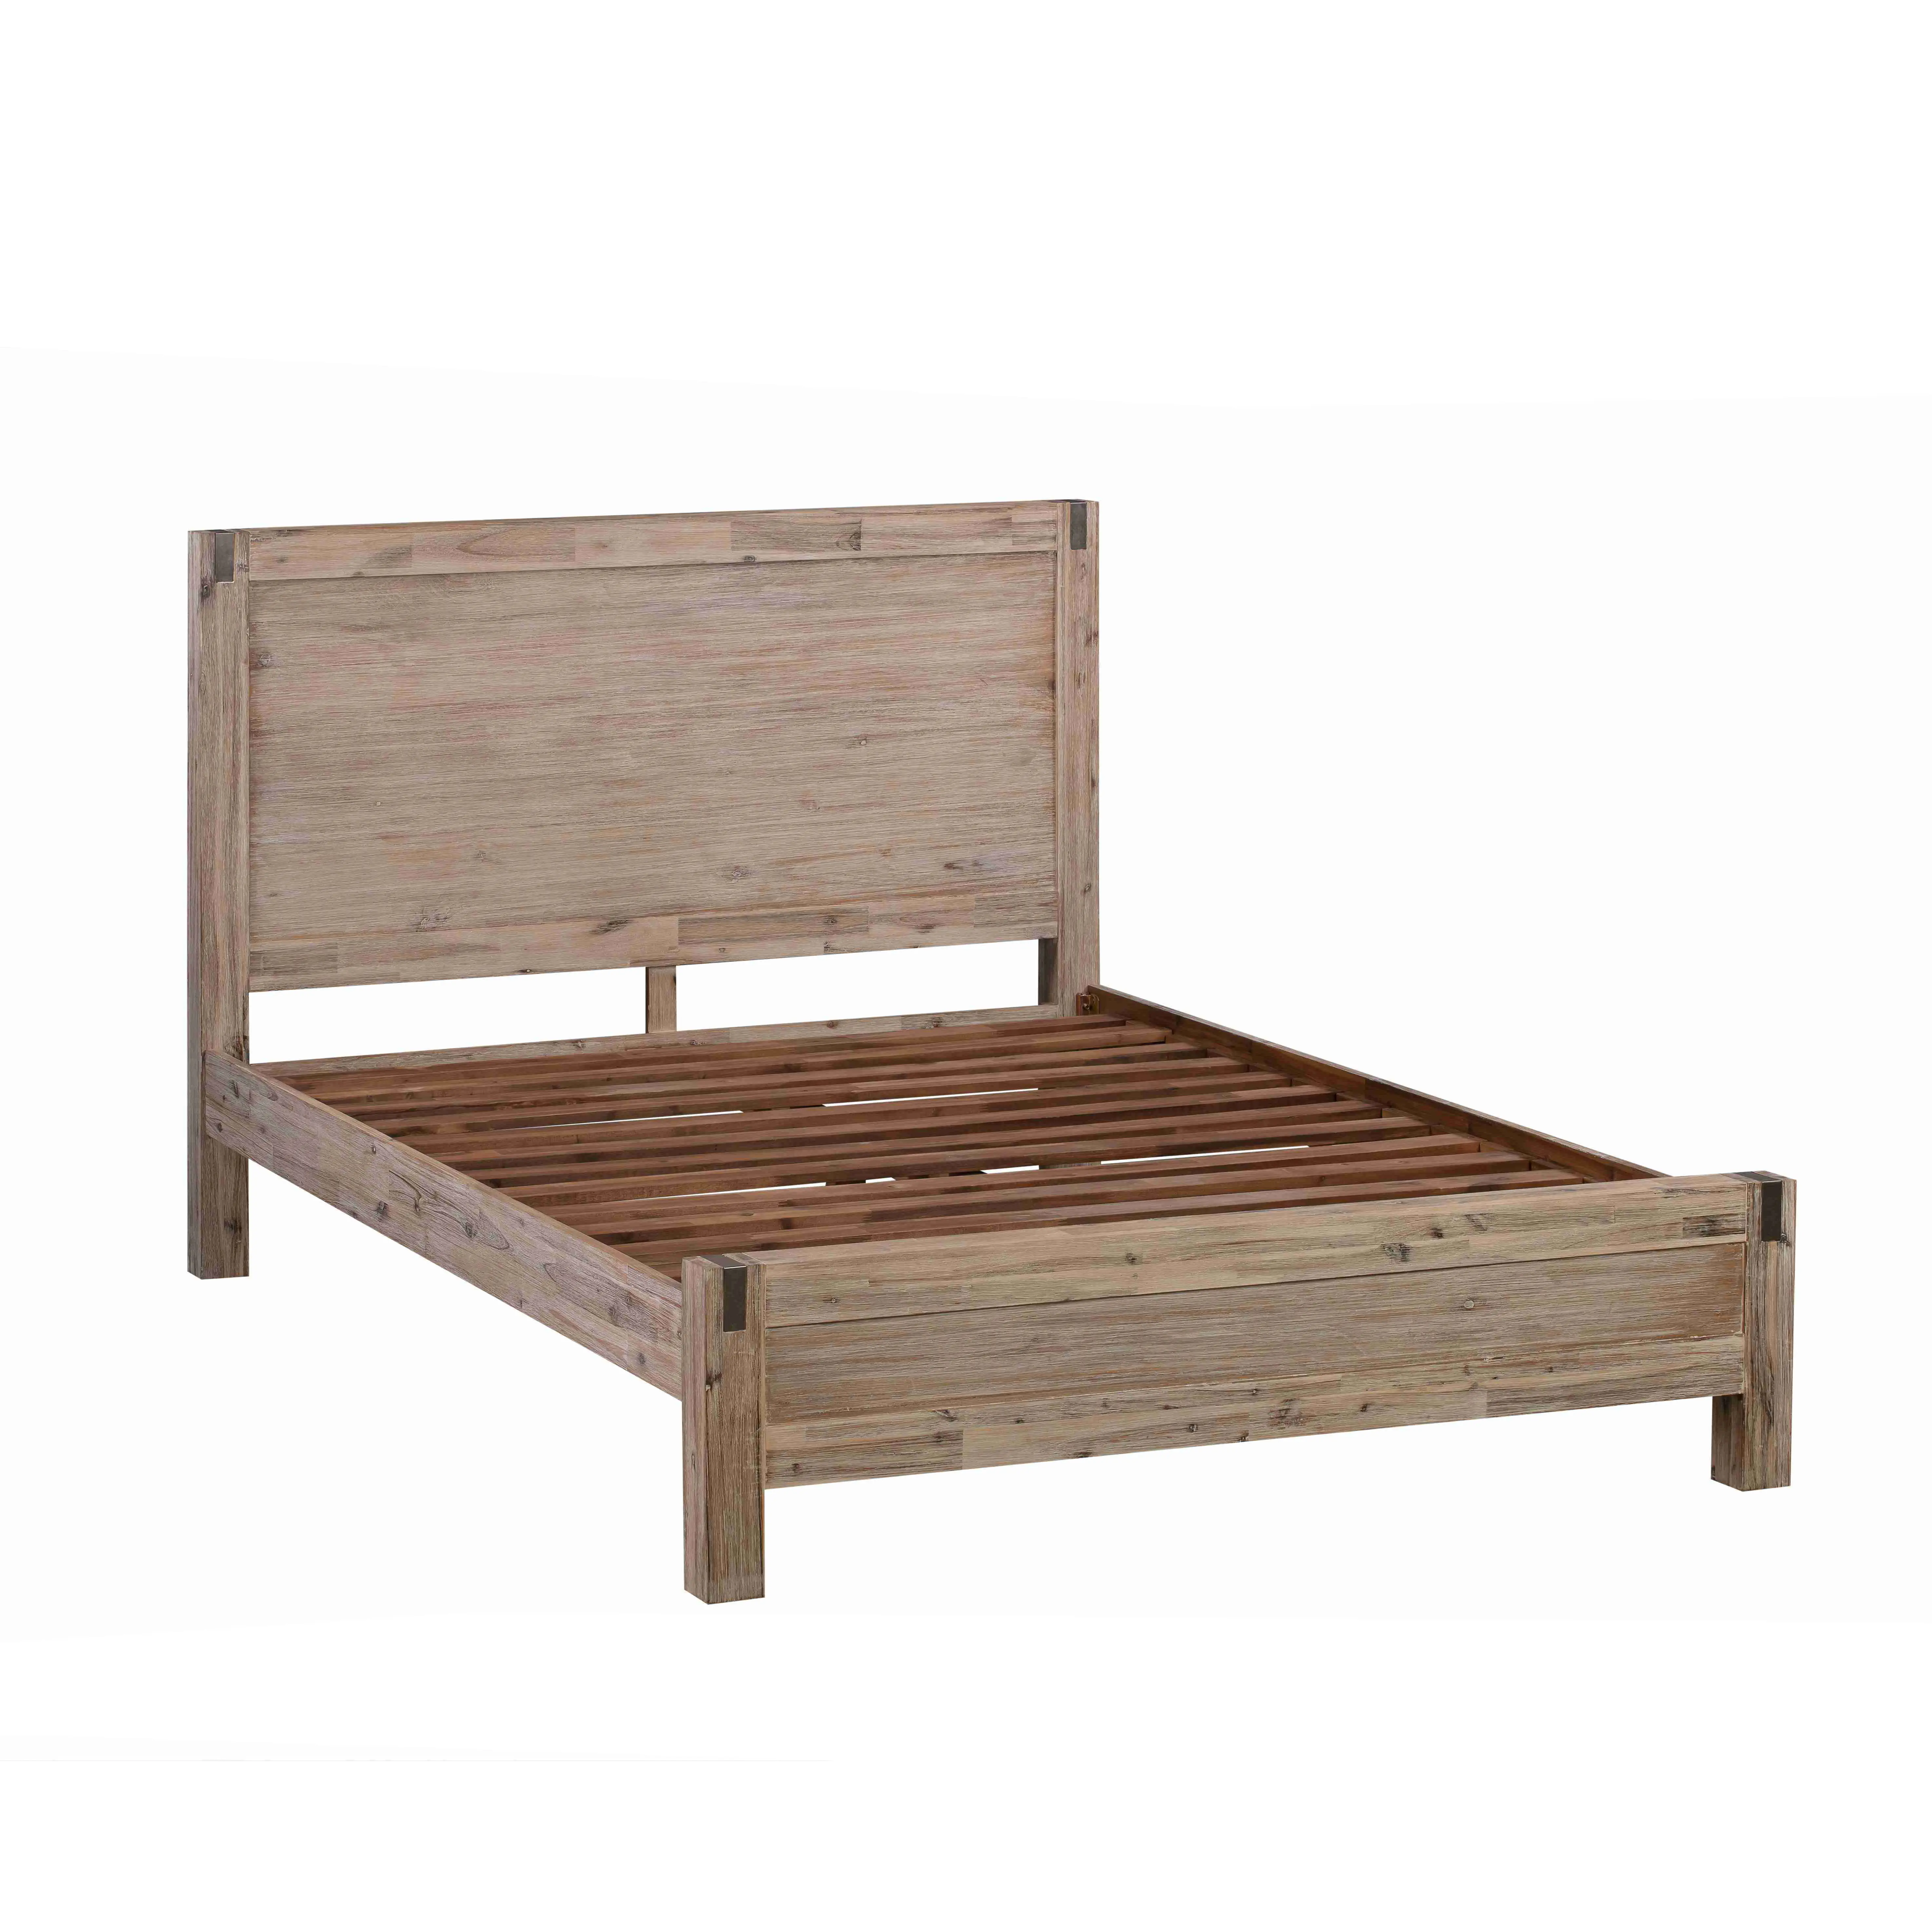 Made in Vietnam Acacia Distressed European Wooden Beds for Bedroom